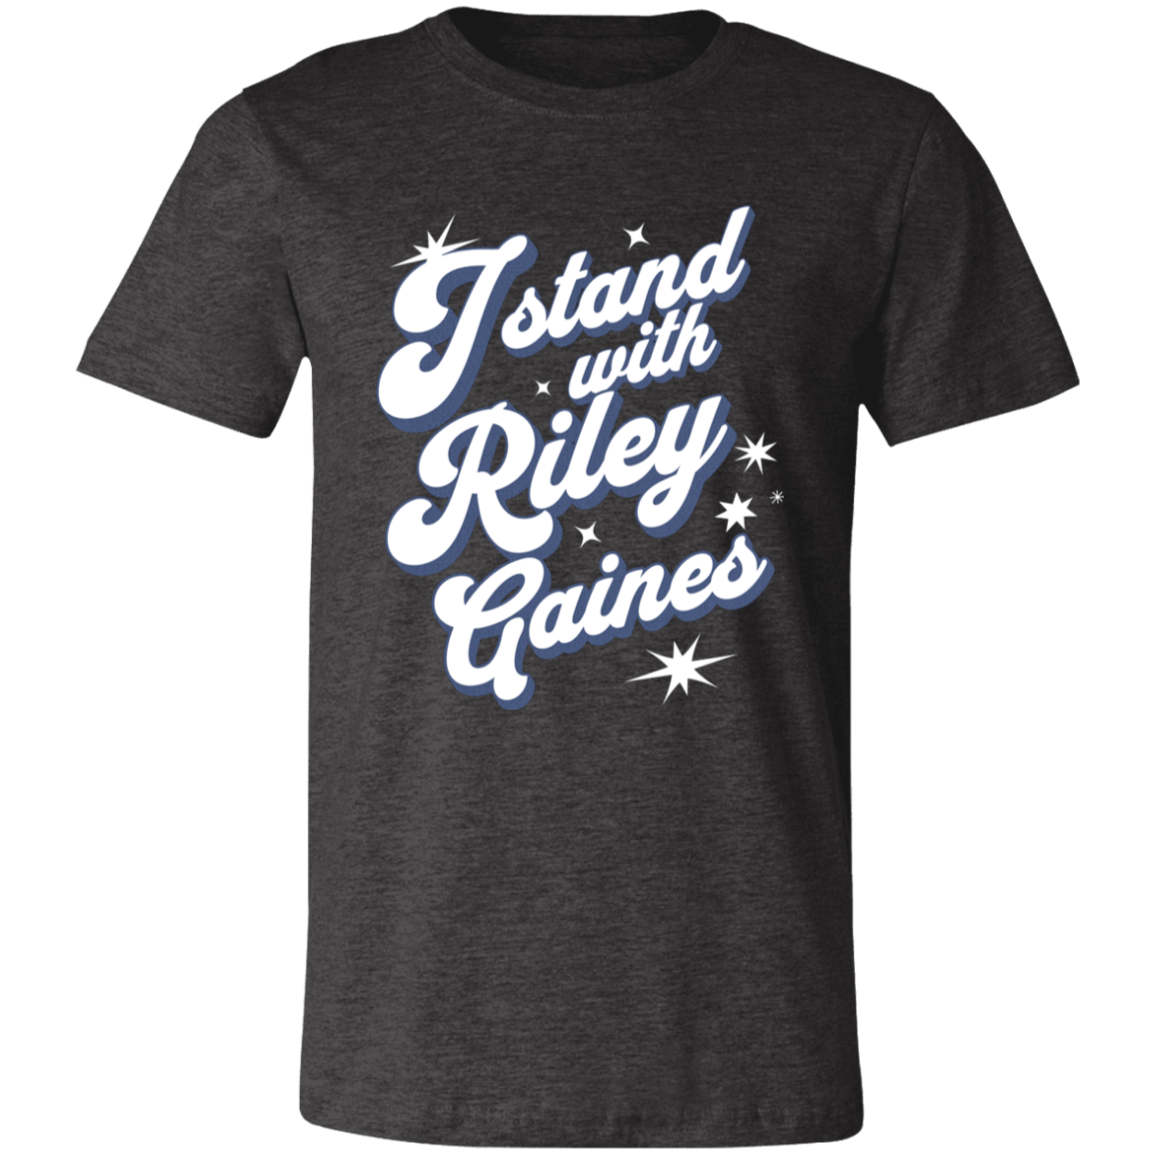 Riley Gaines Protecting Women's Sports Tshirt, Protect girl's sports, biology matters-T-Shirts-PureDesignTees